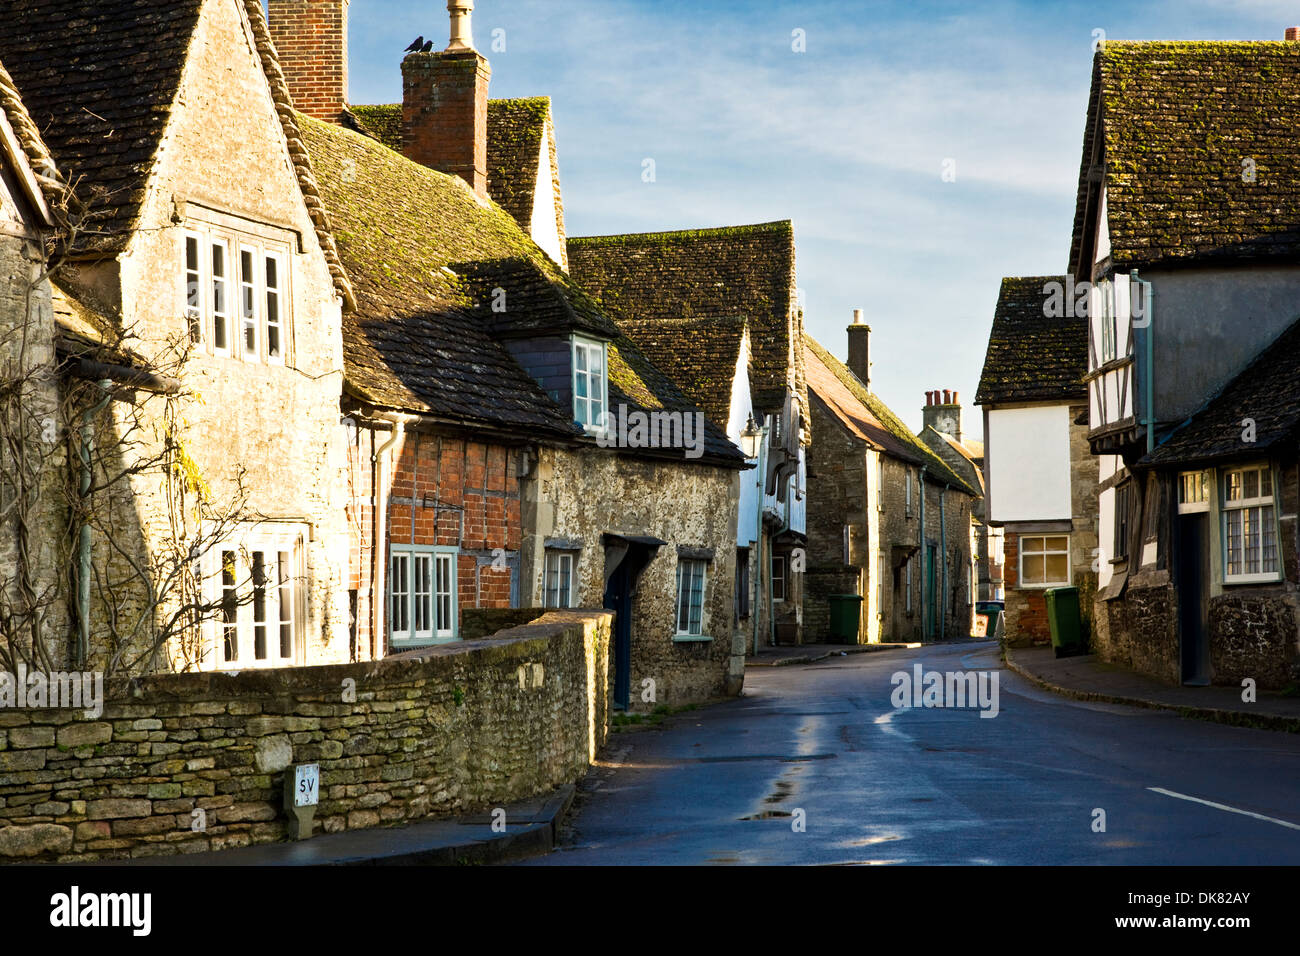 A street of medieval wool merchants' houses in the Wiltshire village of Lacock. Stock Photo